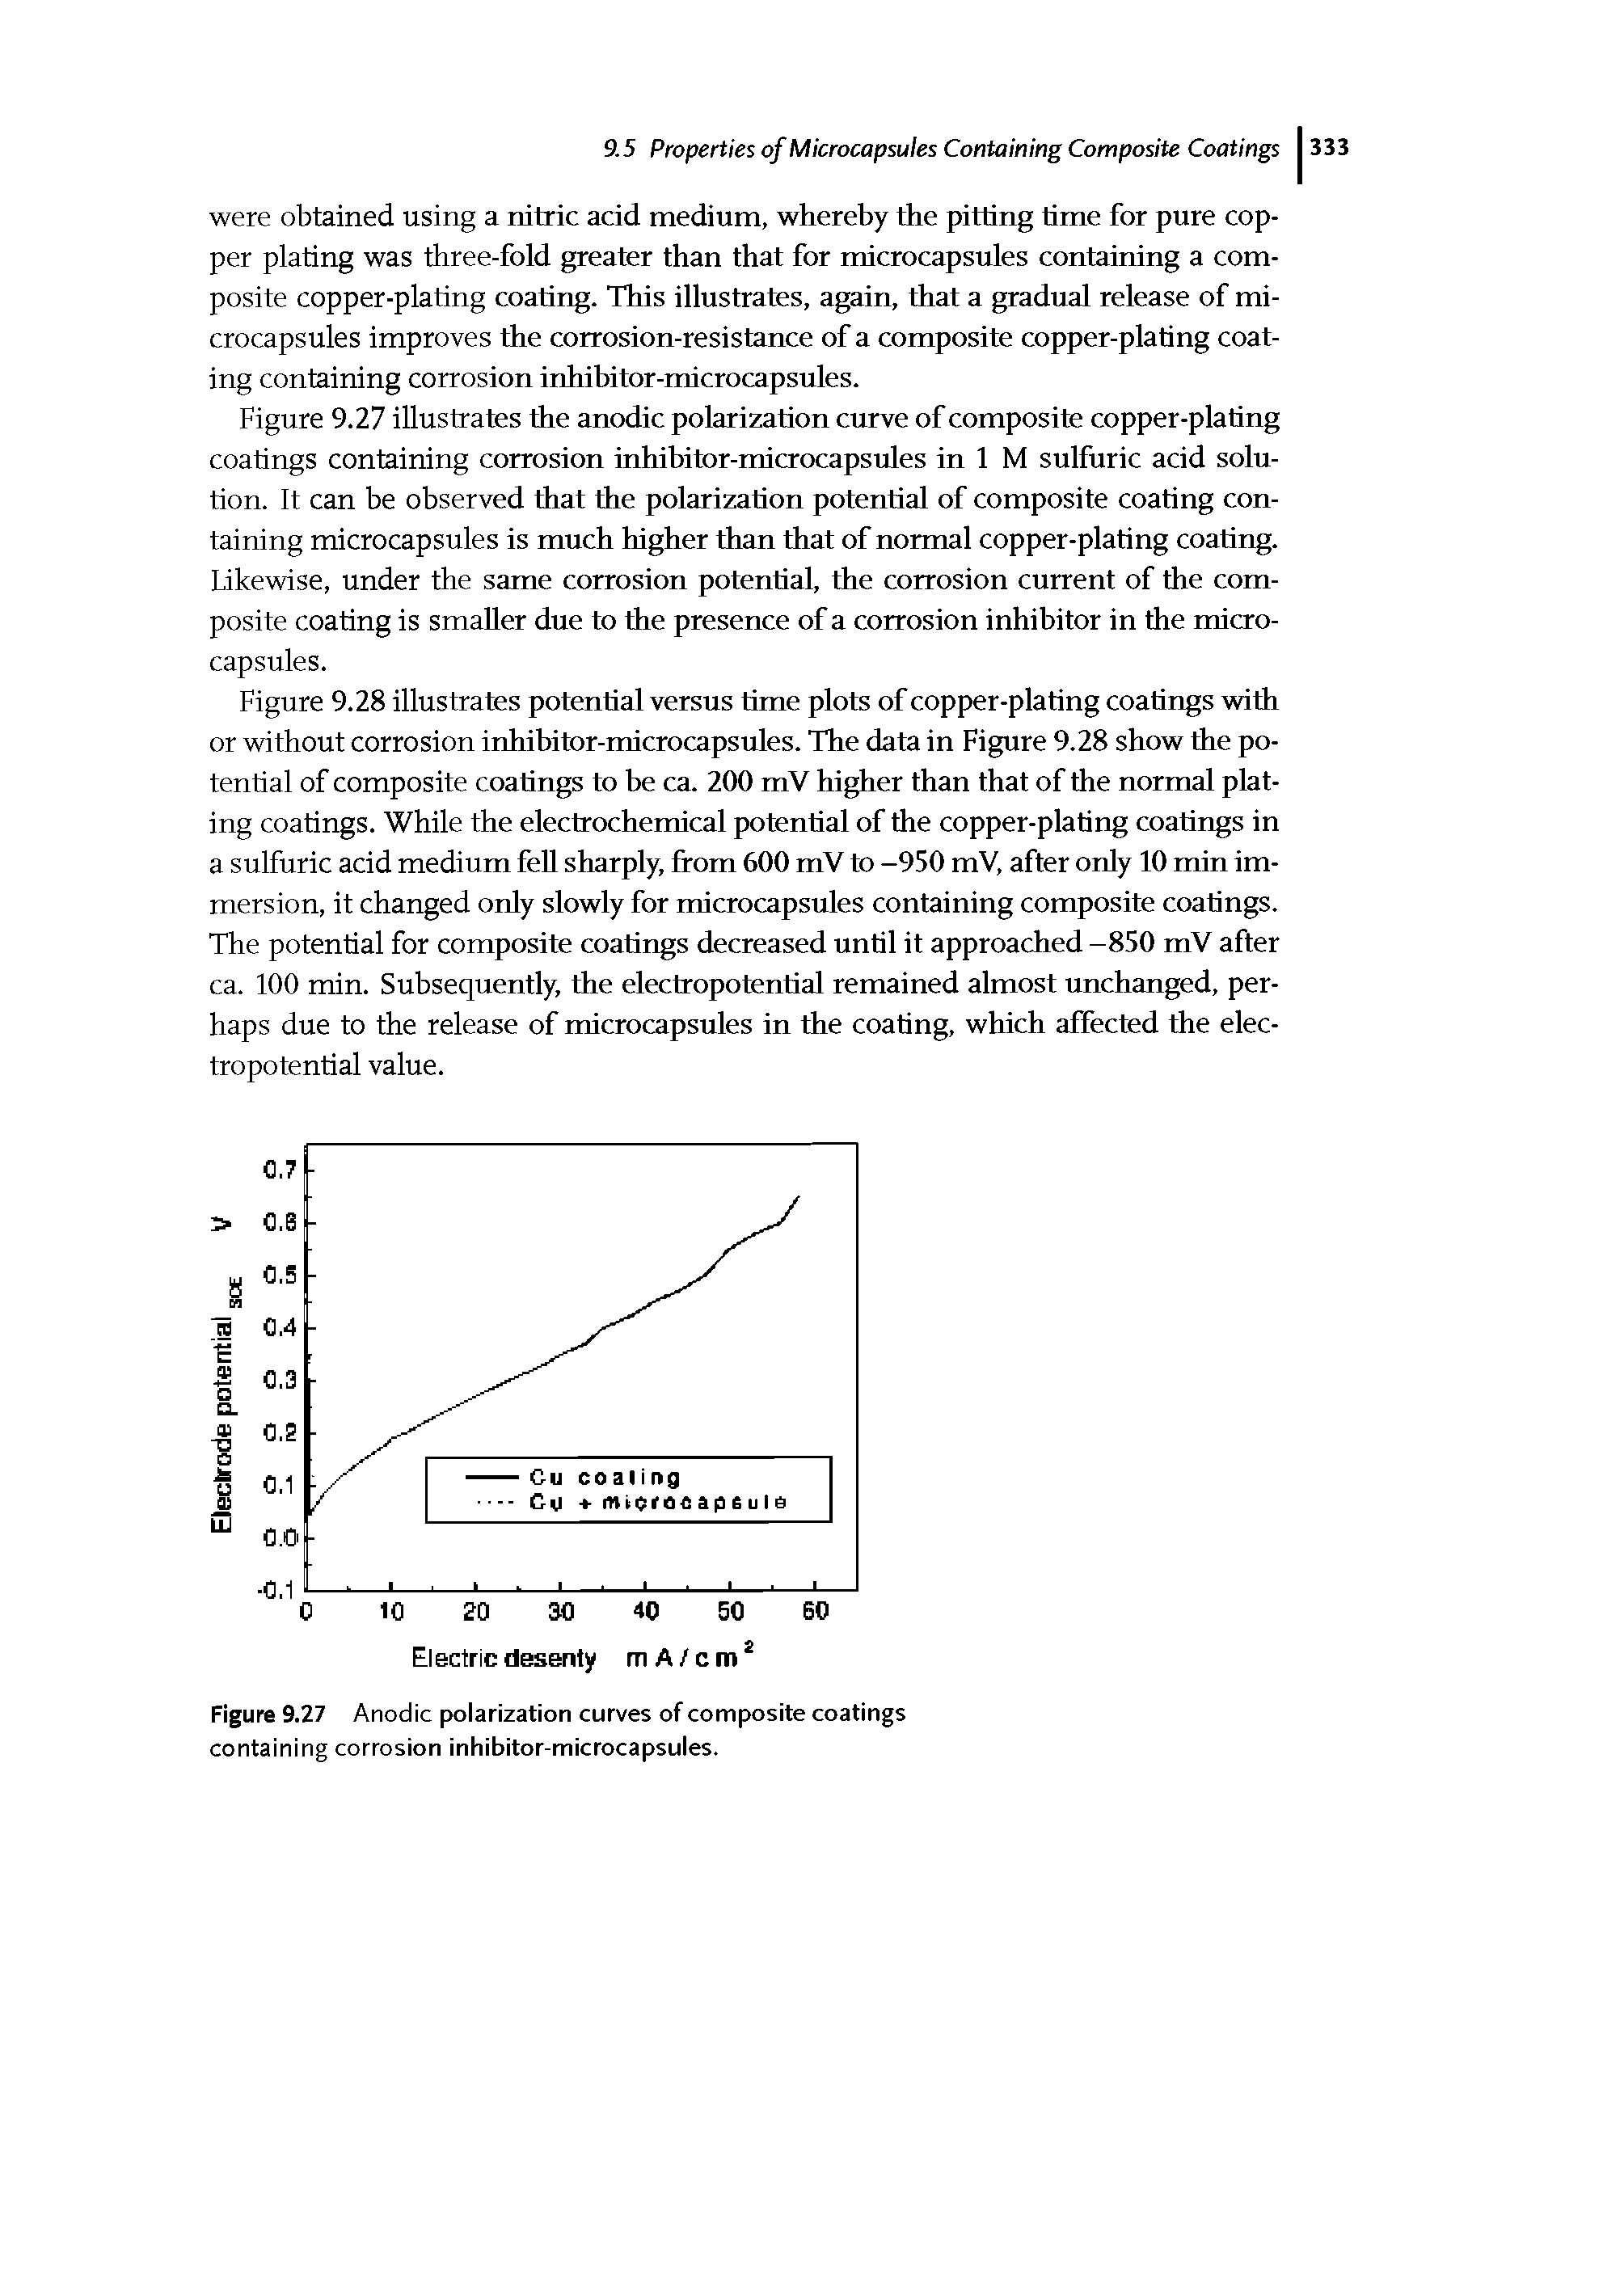 Figure 9.27 Anodic polarization curves of composite coatings containing corrosion inhibitor-microcapsules.